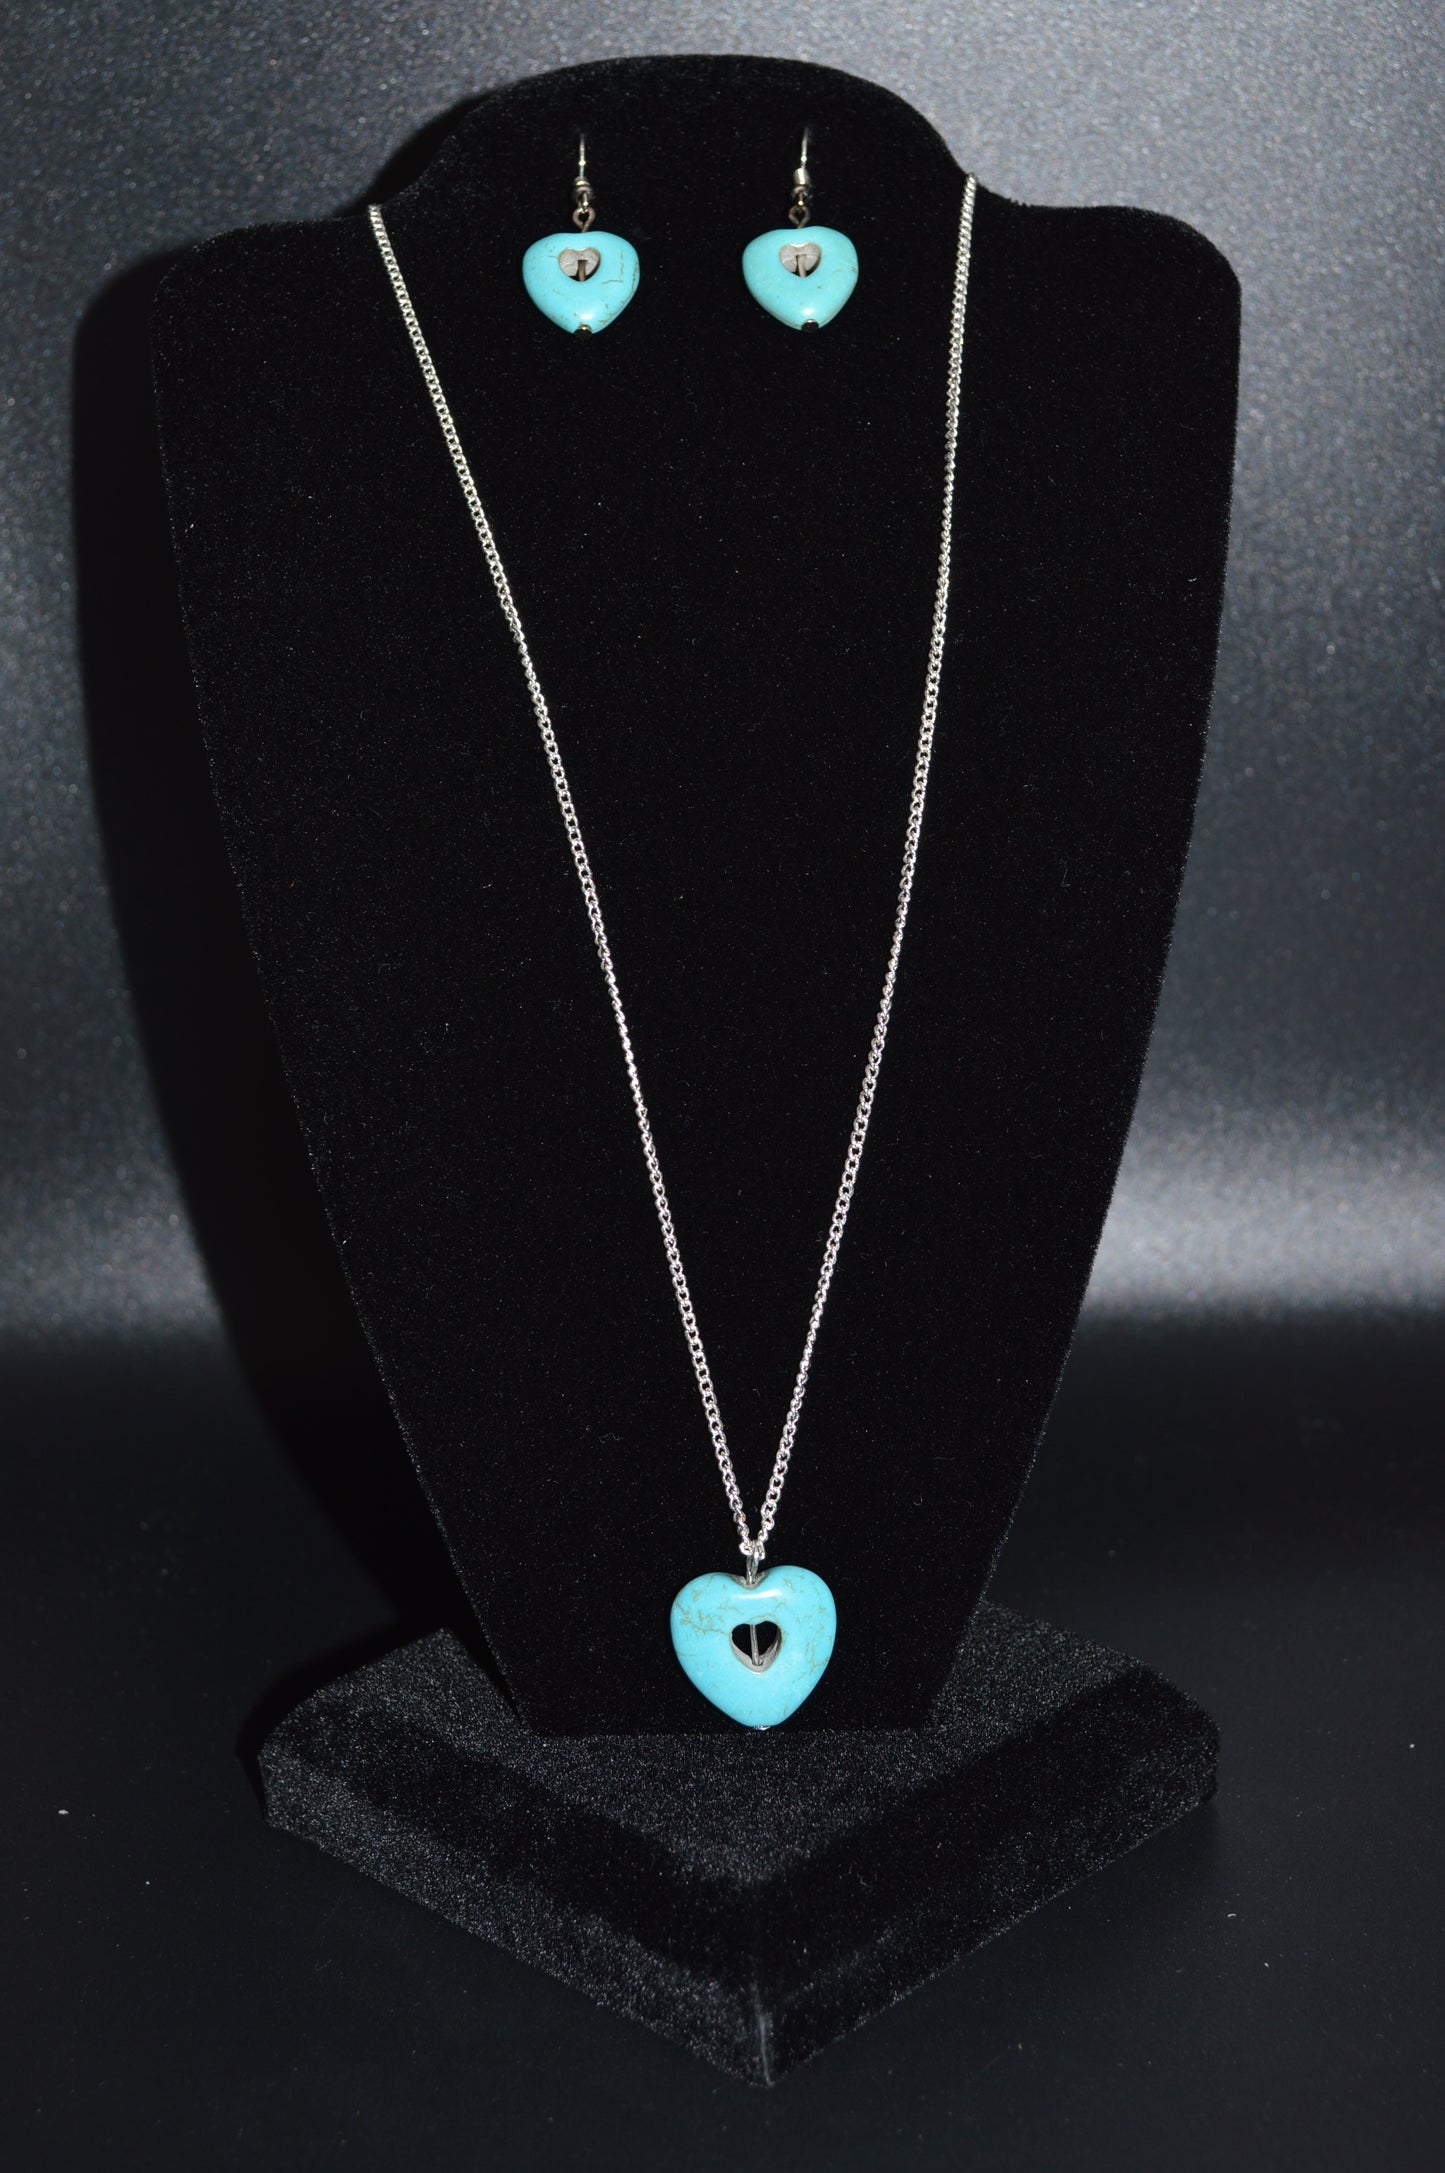 Resin Heart Pendant Necklace and Earring Set (Turquoise)